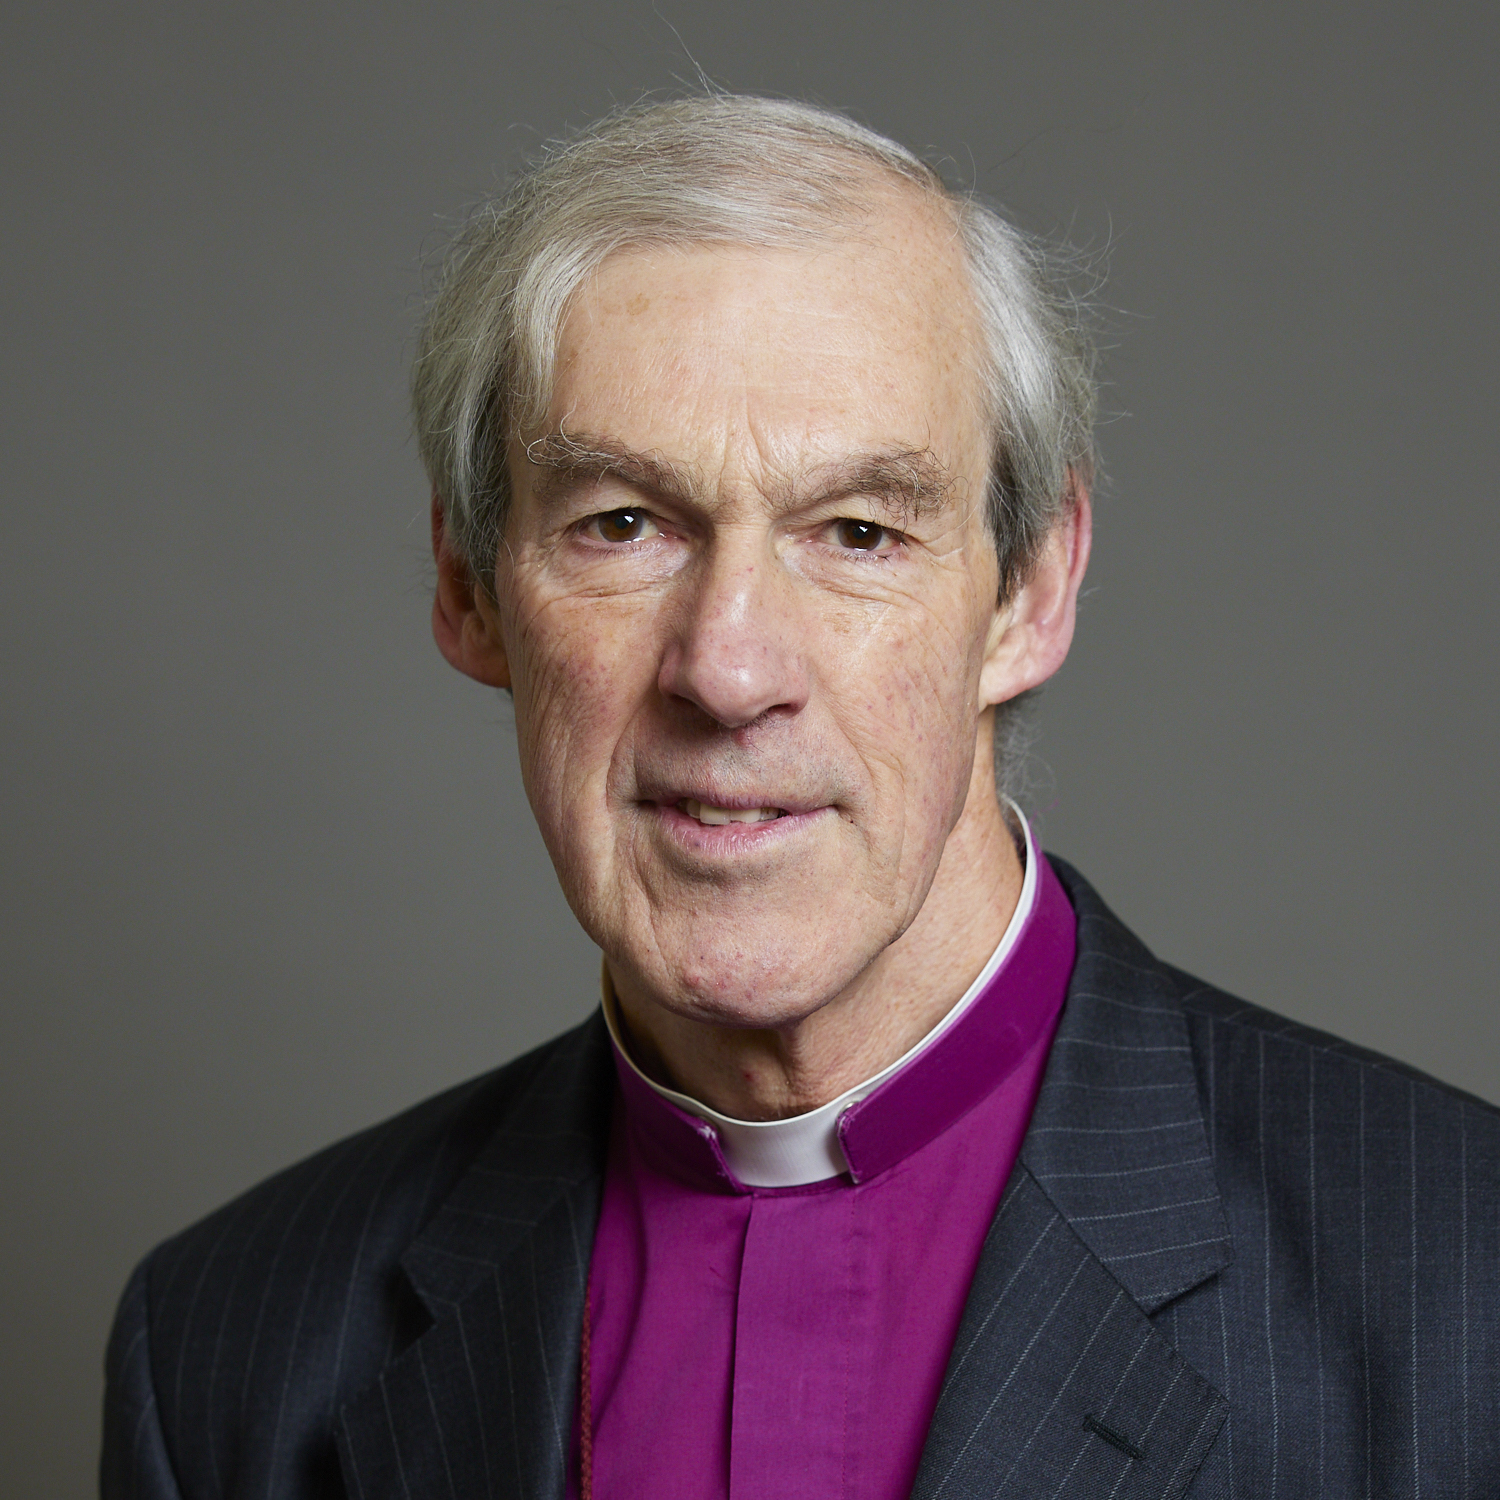 The Rt Revd James Newcome, Bishop of Carlisle 